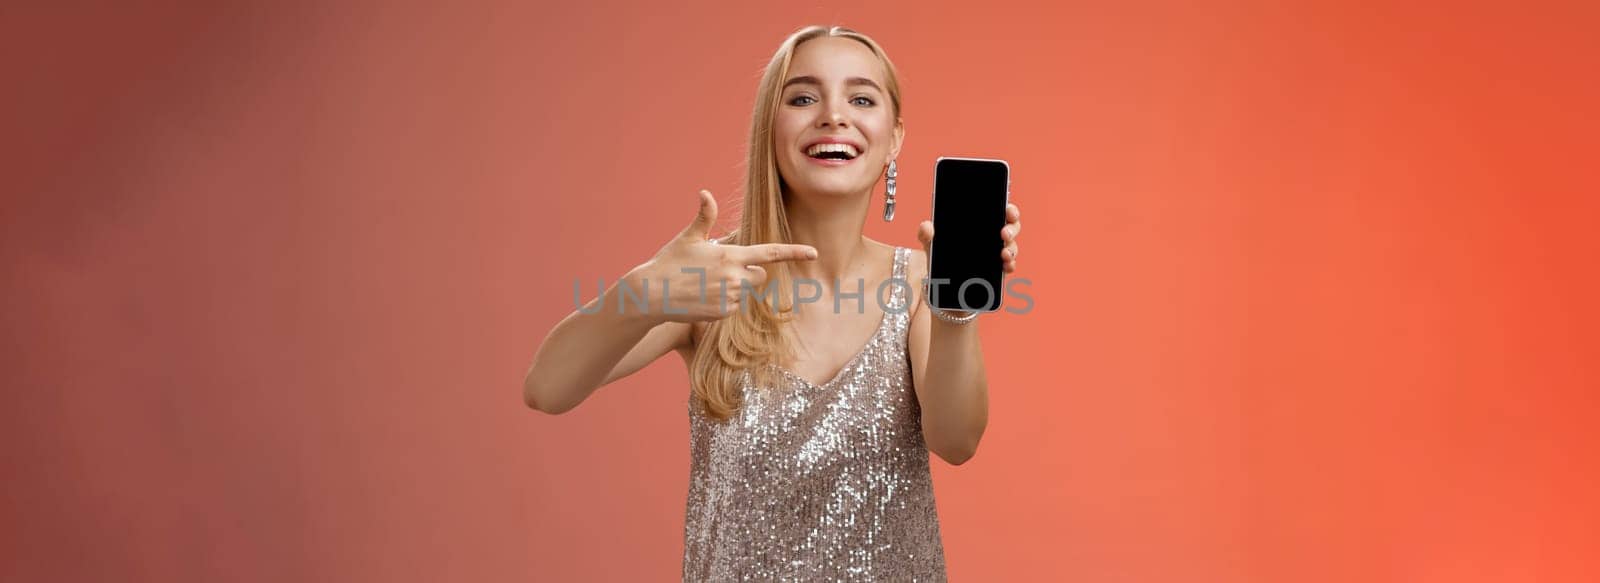 Boastful proud charming elegant blond woman in stylish evening dress show smartphone display proudly pointing mobile phone screen smiling showing photo boyfriend, standing red background.